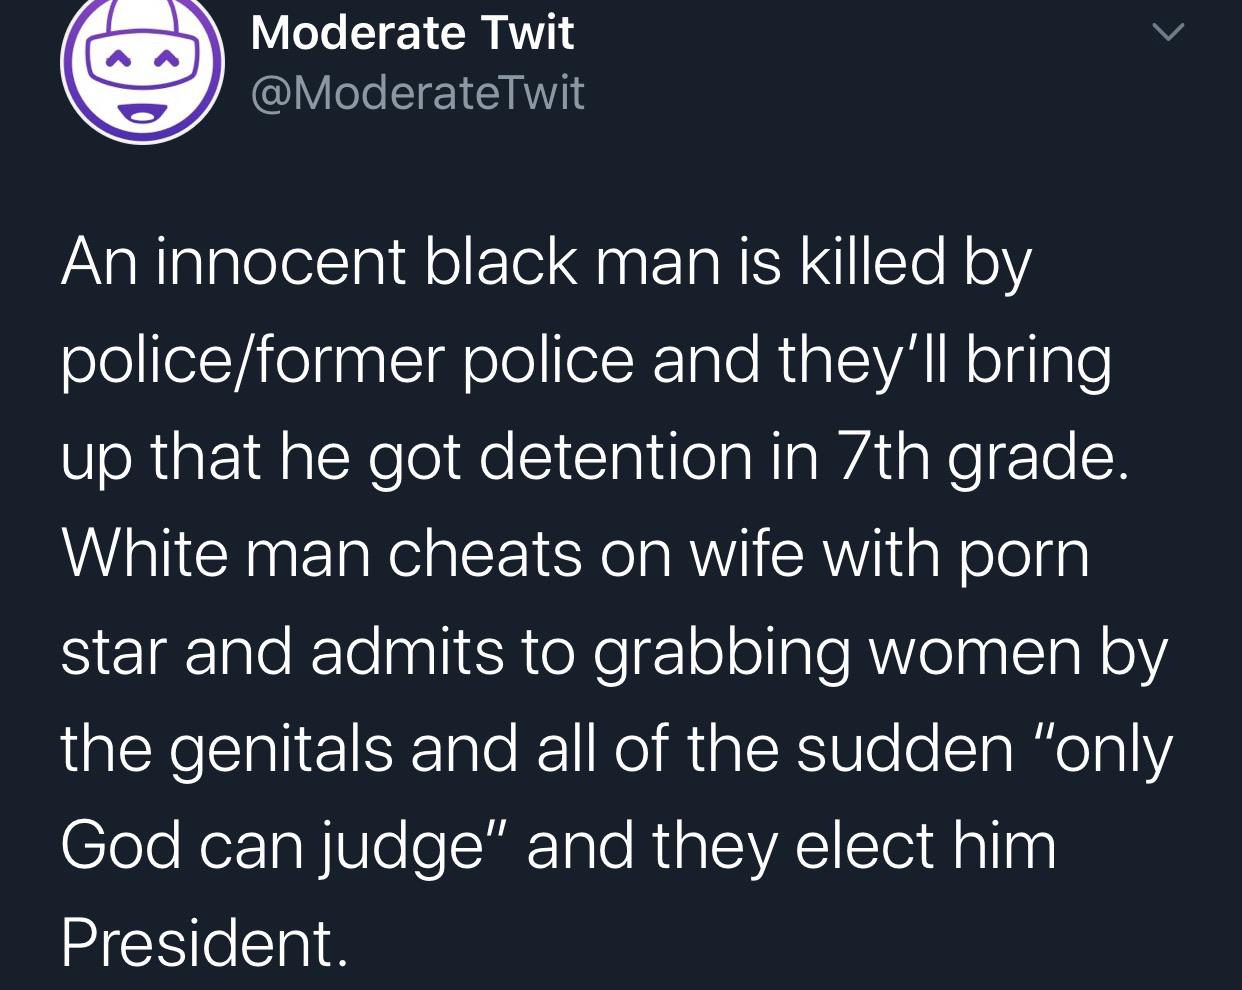 Political, Trump, President Putin, Underage, No, God Political Memes Political, Trump, President Putin, Underage, No, God text: Moderate Twit @ModerateTwit An innocent black man is killed by police/former police and they'll bring up that he got detention in 7th grade. White man cheats on wife with porn star and admits to grabbing women by the genitals and all of the sudden 